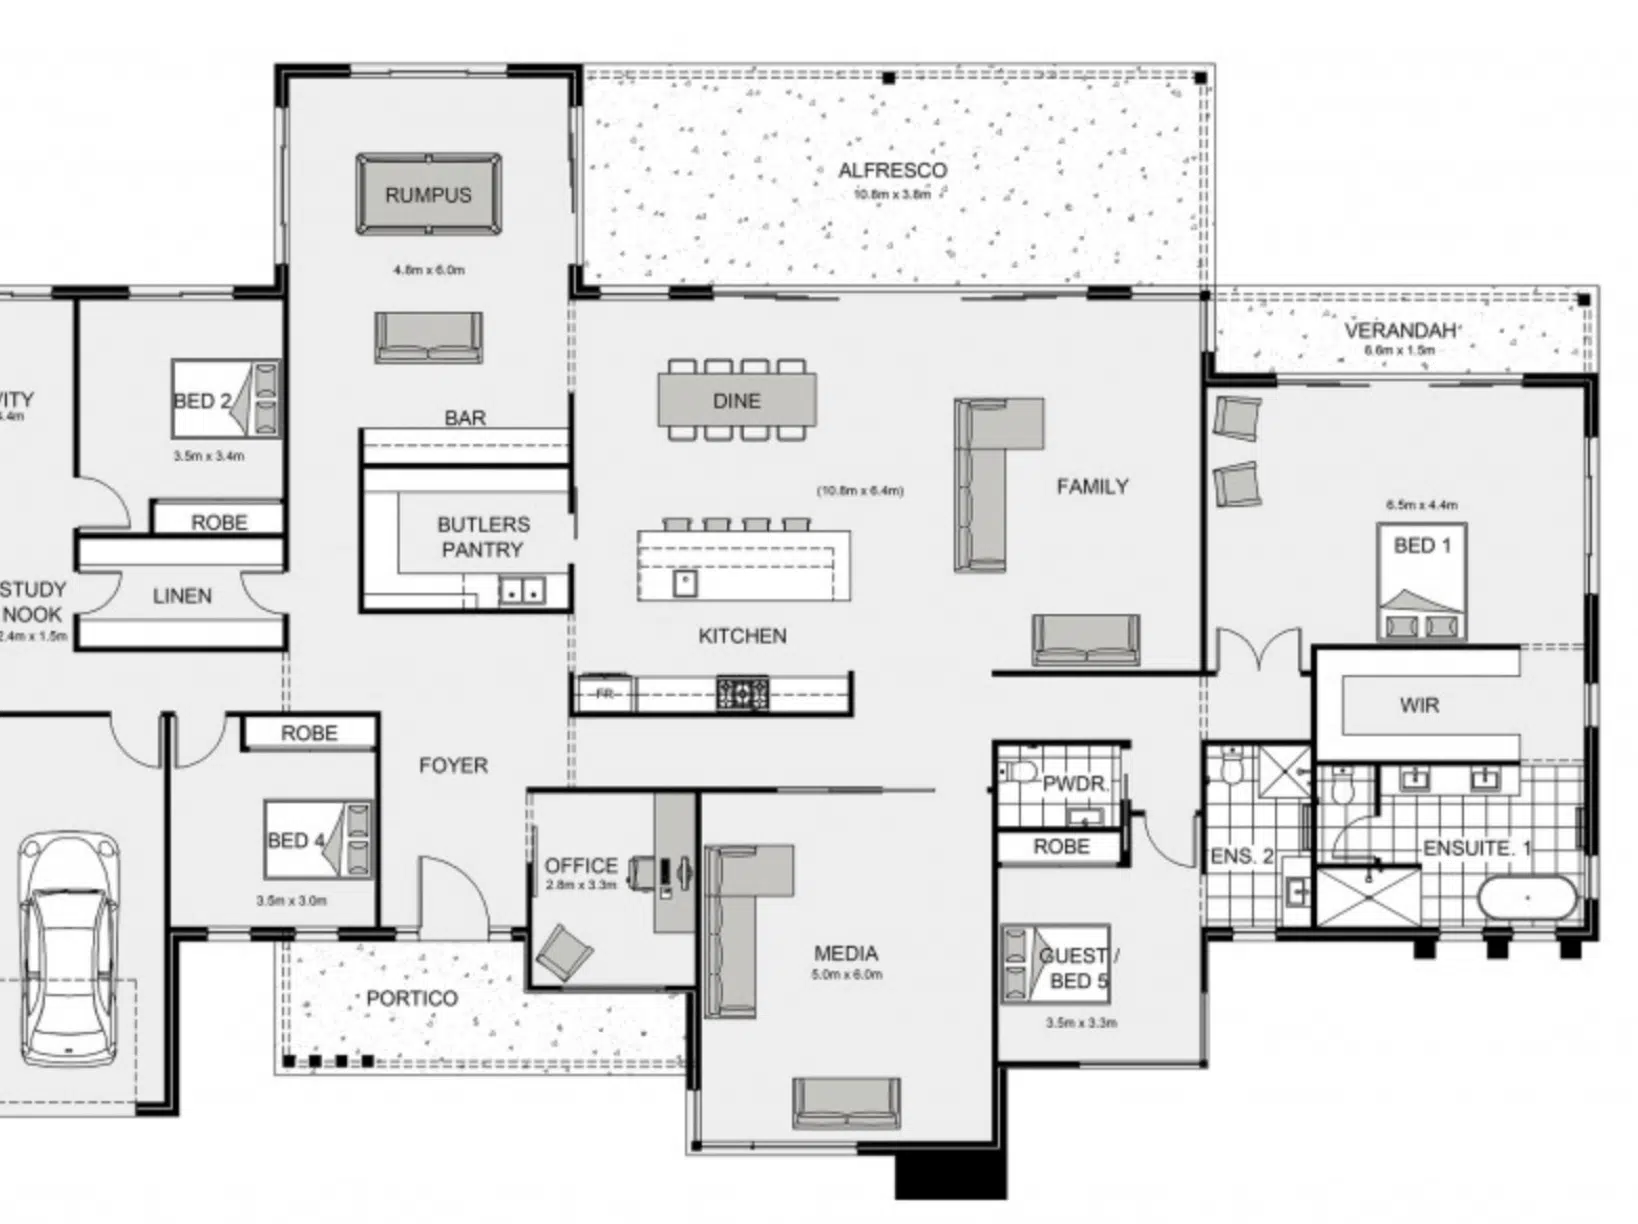 House floor plan showing different dimensions of rooms and carpet cleaning prices